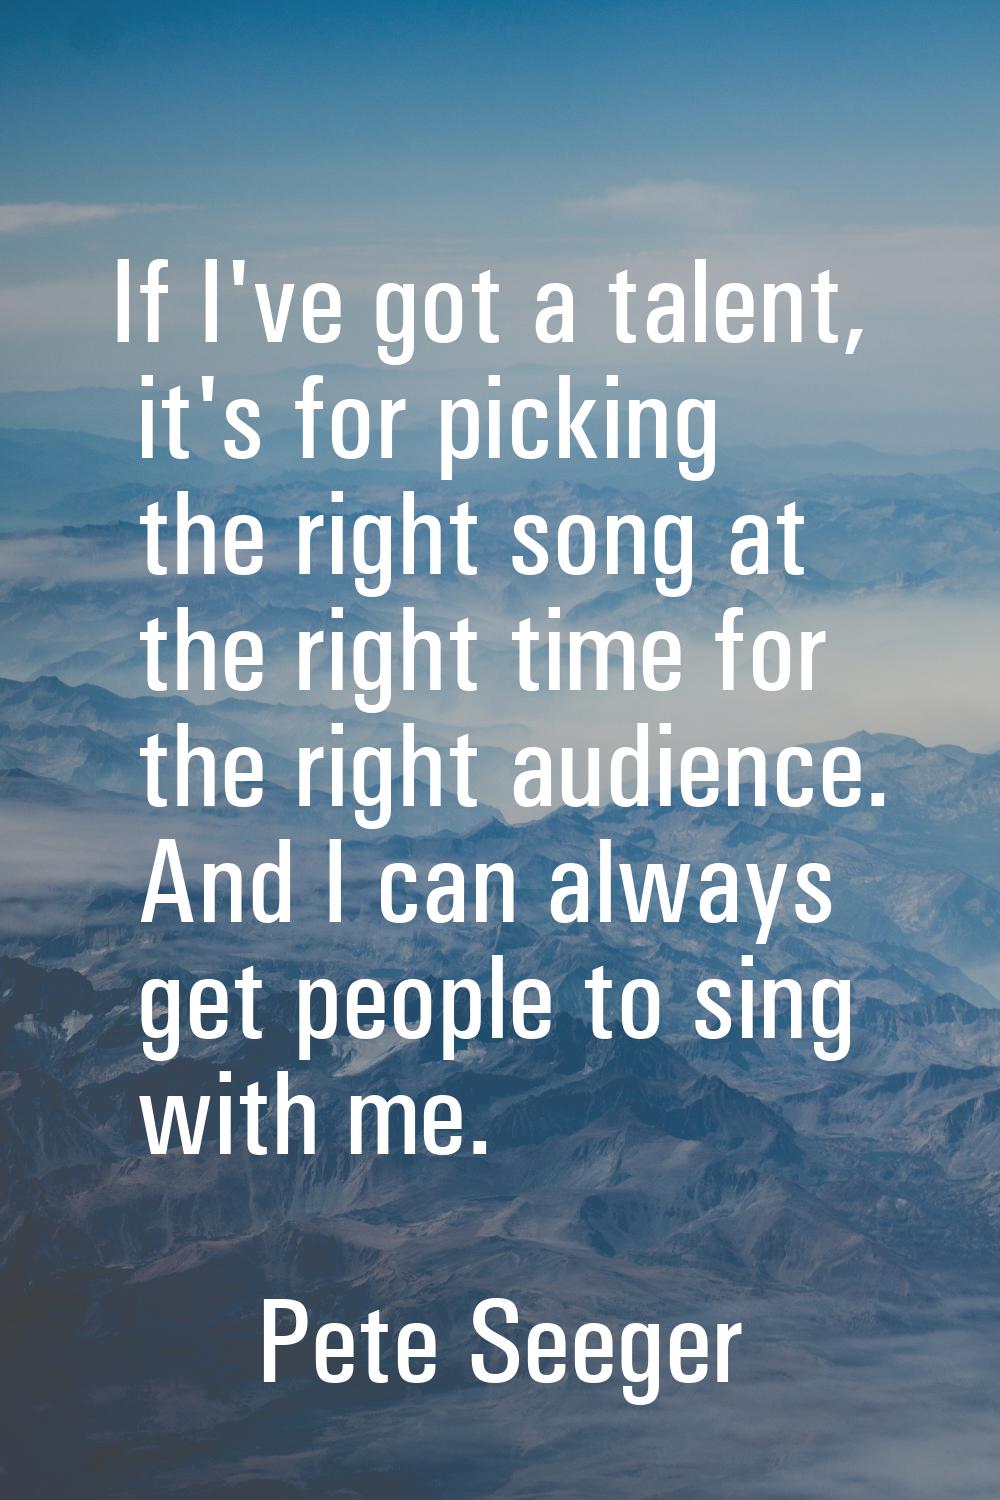 If I've got a talent, it's for picking the right song at the right time for the right audience. And